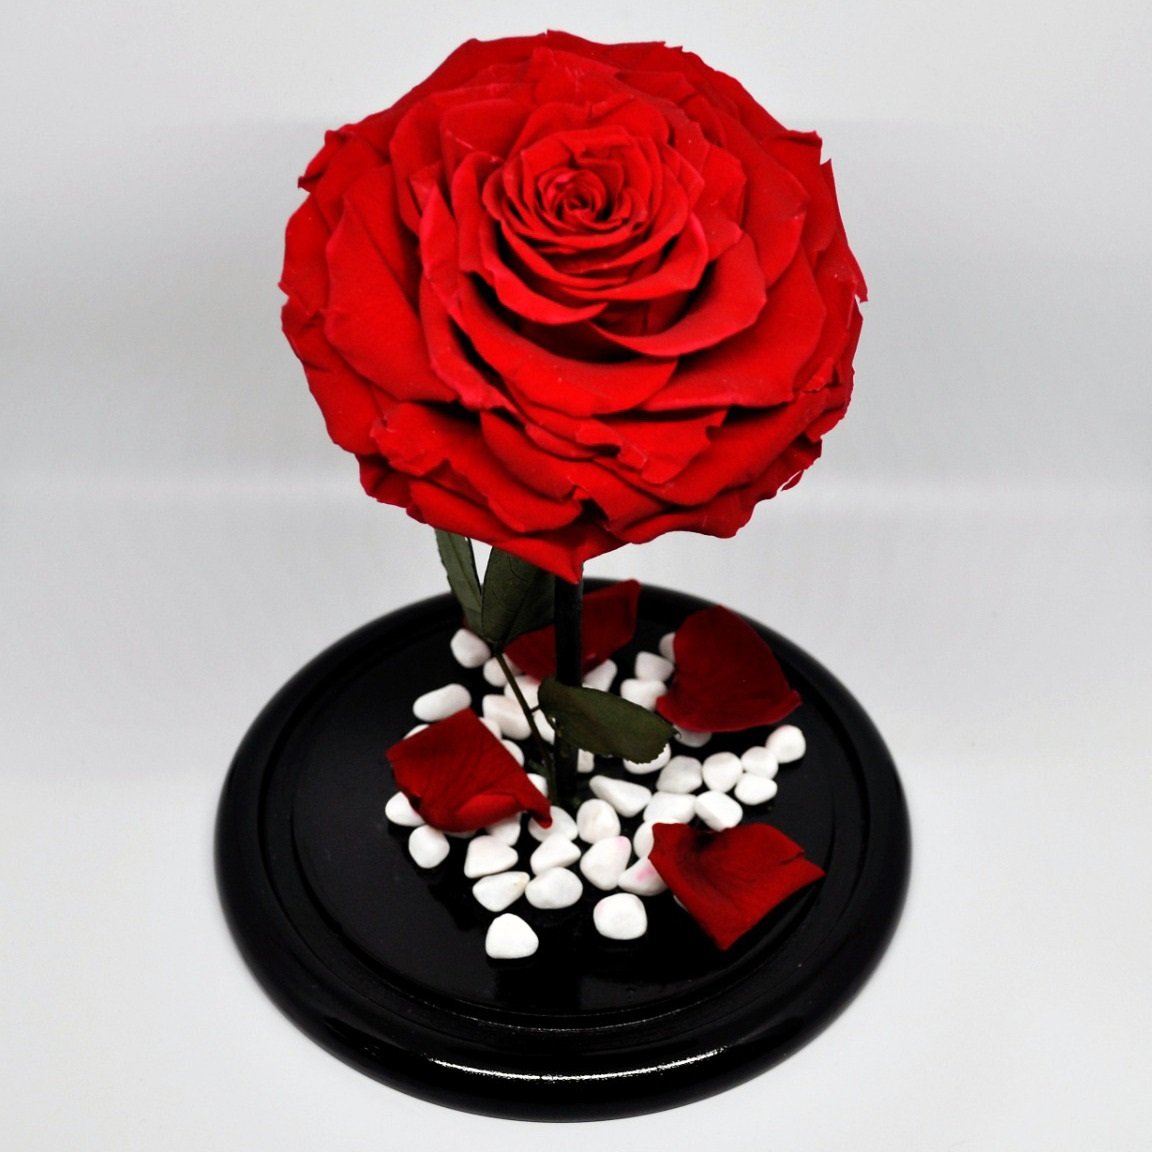 Preserved Jumbo Red Rose in a Dome